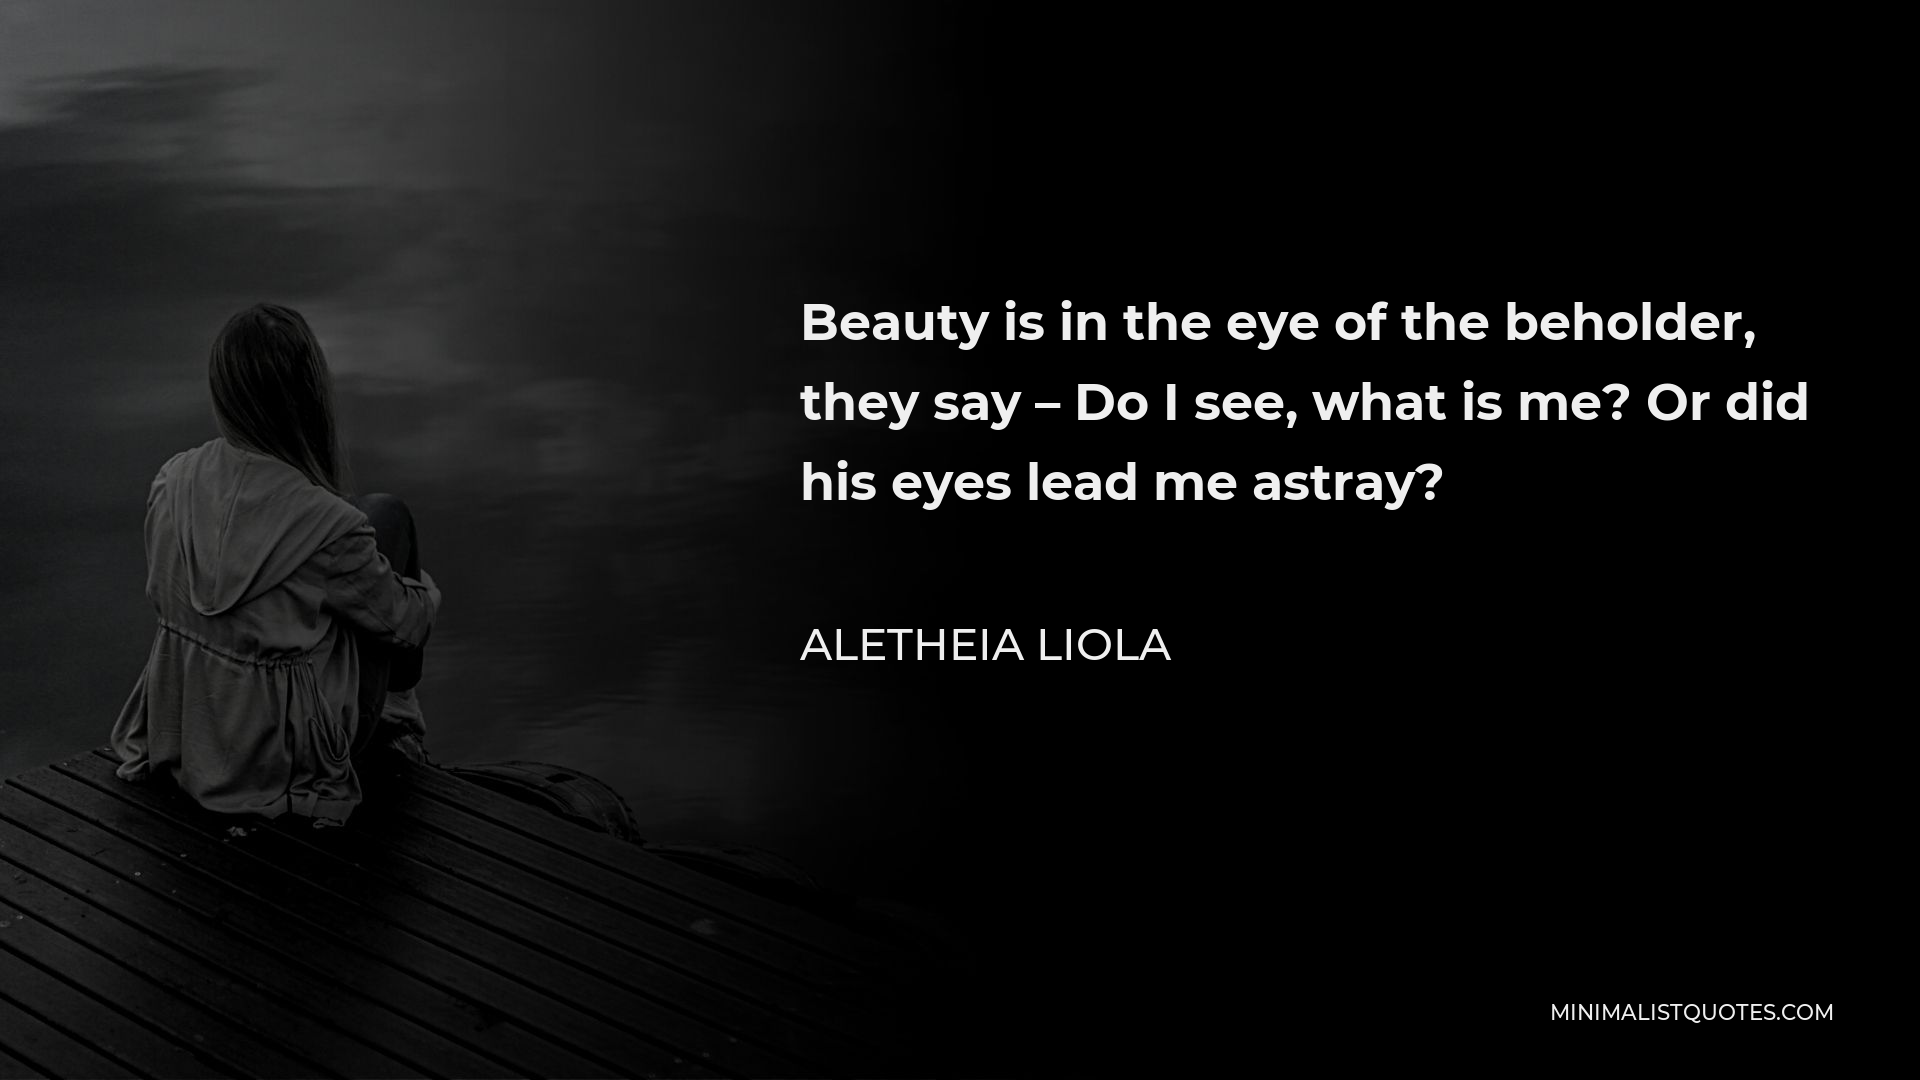 Aletheia Liola Quote - Beauty is in the eye of the beholder, they say – Do I see, what is me? Or did his eyes lead me astray?